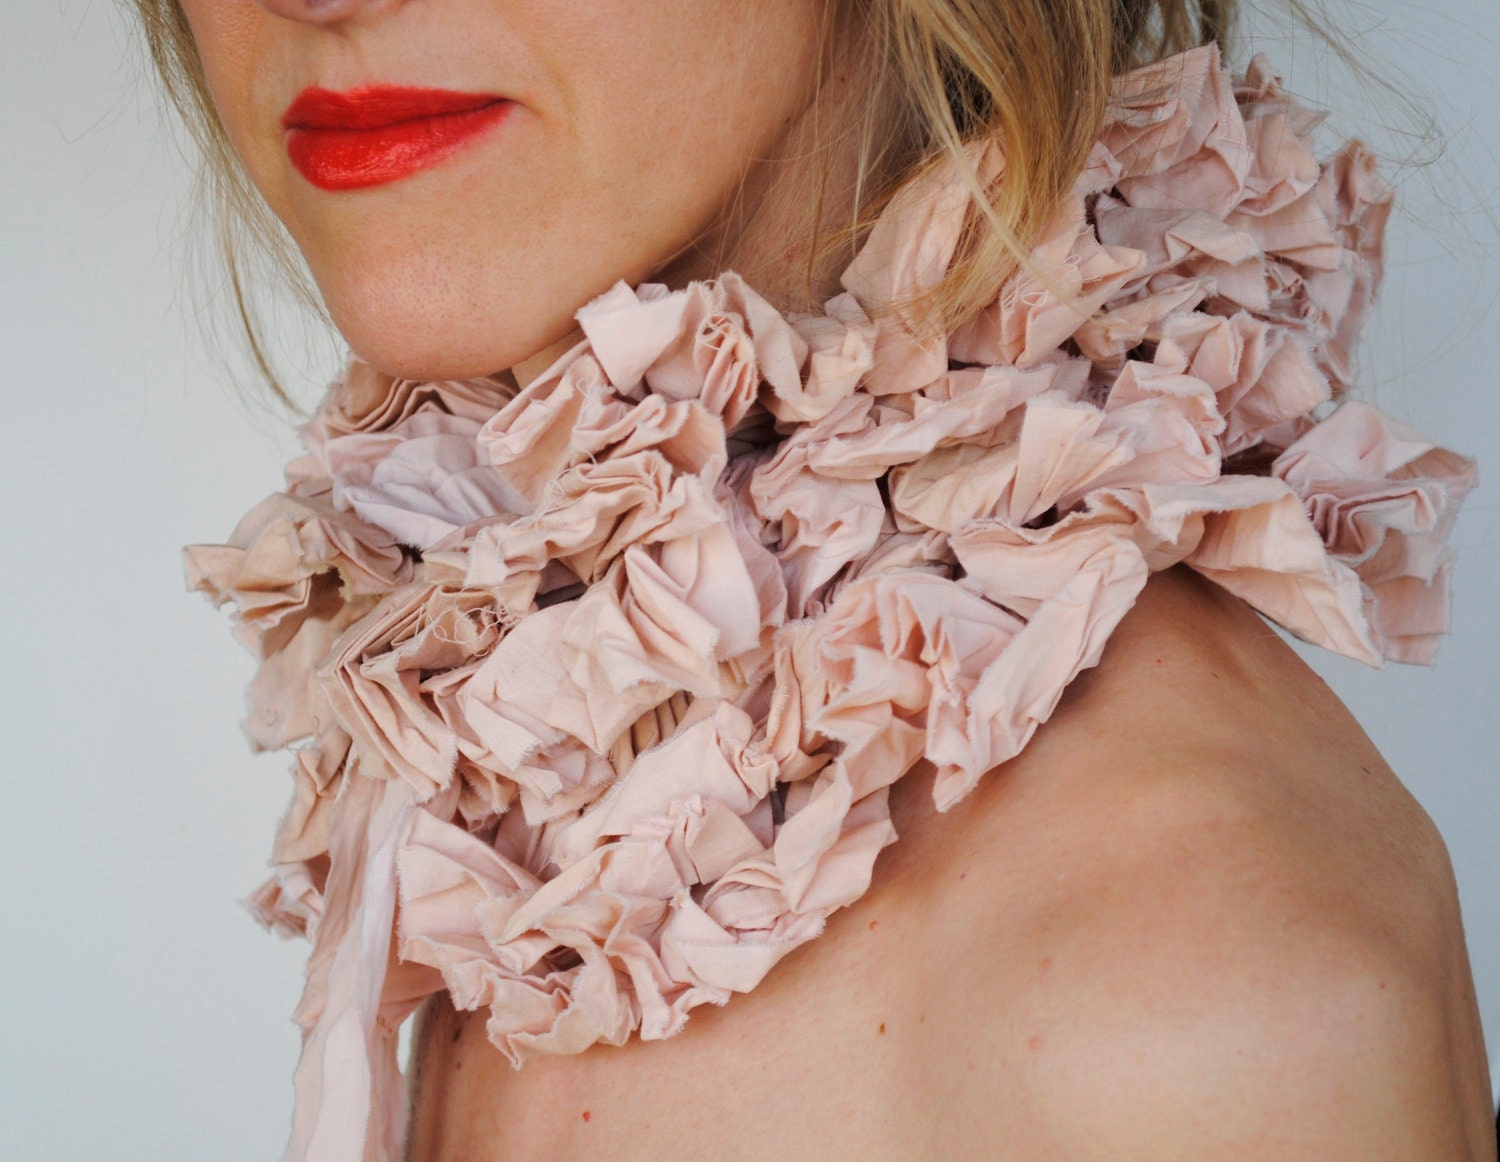 Ruffle collar/ Hand dyed cotton muslin/ Shabby chic/Tan/ Hand made/ Ruffled Fashion/ for her under 50